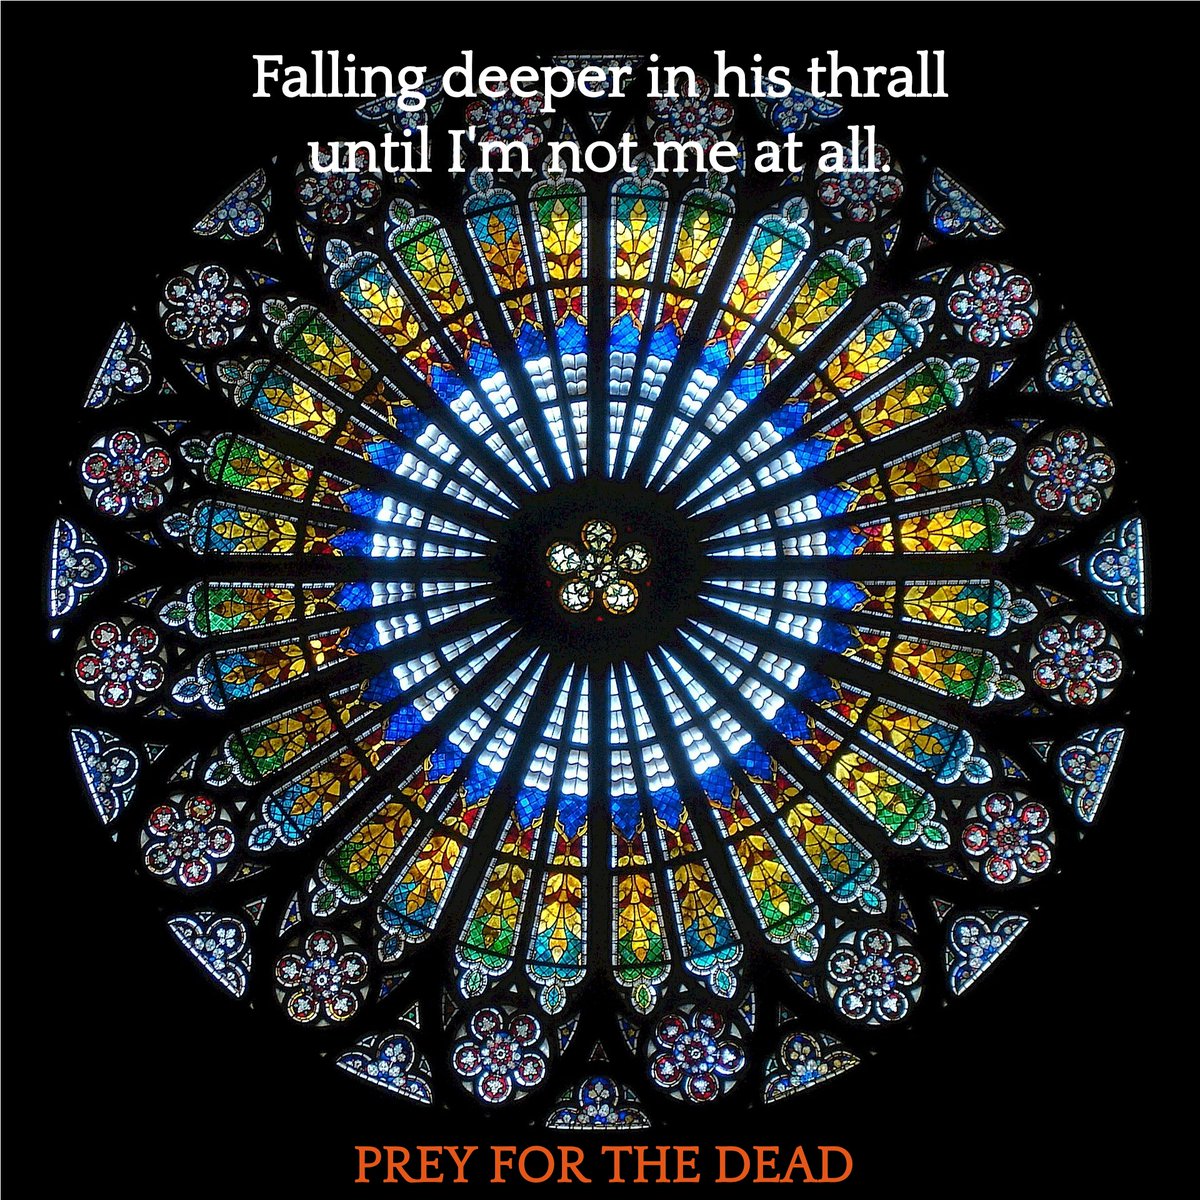 PREY FOR THE DEAD I fall deep into his thrall until I'm not me at all. I must prepare for the full moon but refuse to yield to his sweet tune. Time is still on my side. By his side, I won't reside. amzn.to/2YHf3Uz #horrorbook #booksilove #bookbubble